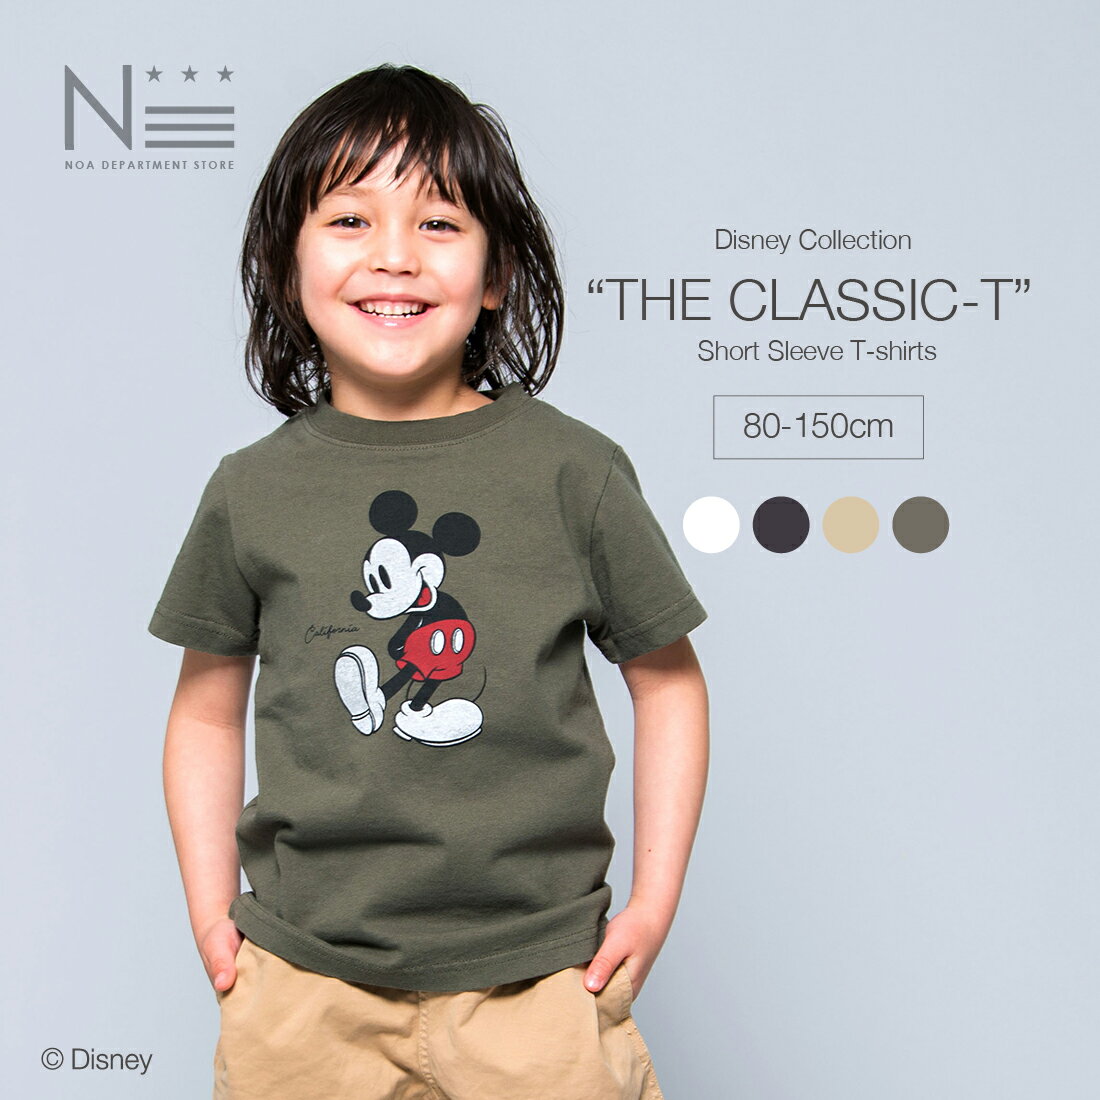 noa department store. THE CLASSIC ミッキーマウス Tシャツ（80cm 90cm 100cm 110cm 120cm 130cm 140cm 150cm） Disney 半袖 Tシャツ 